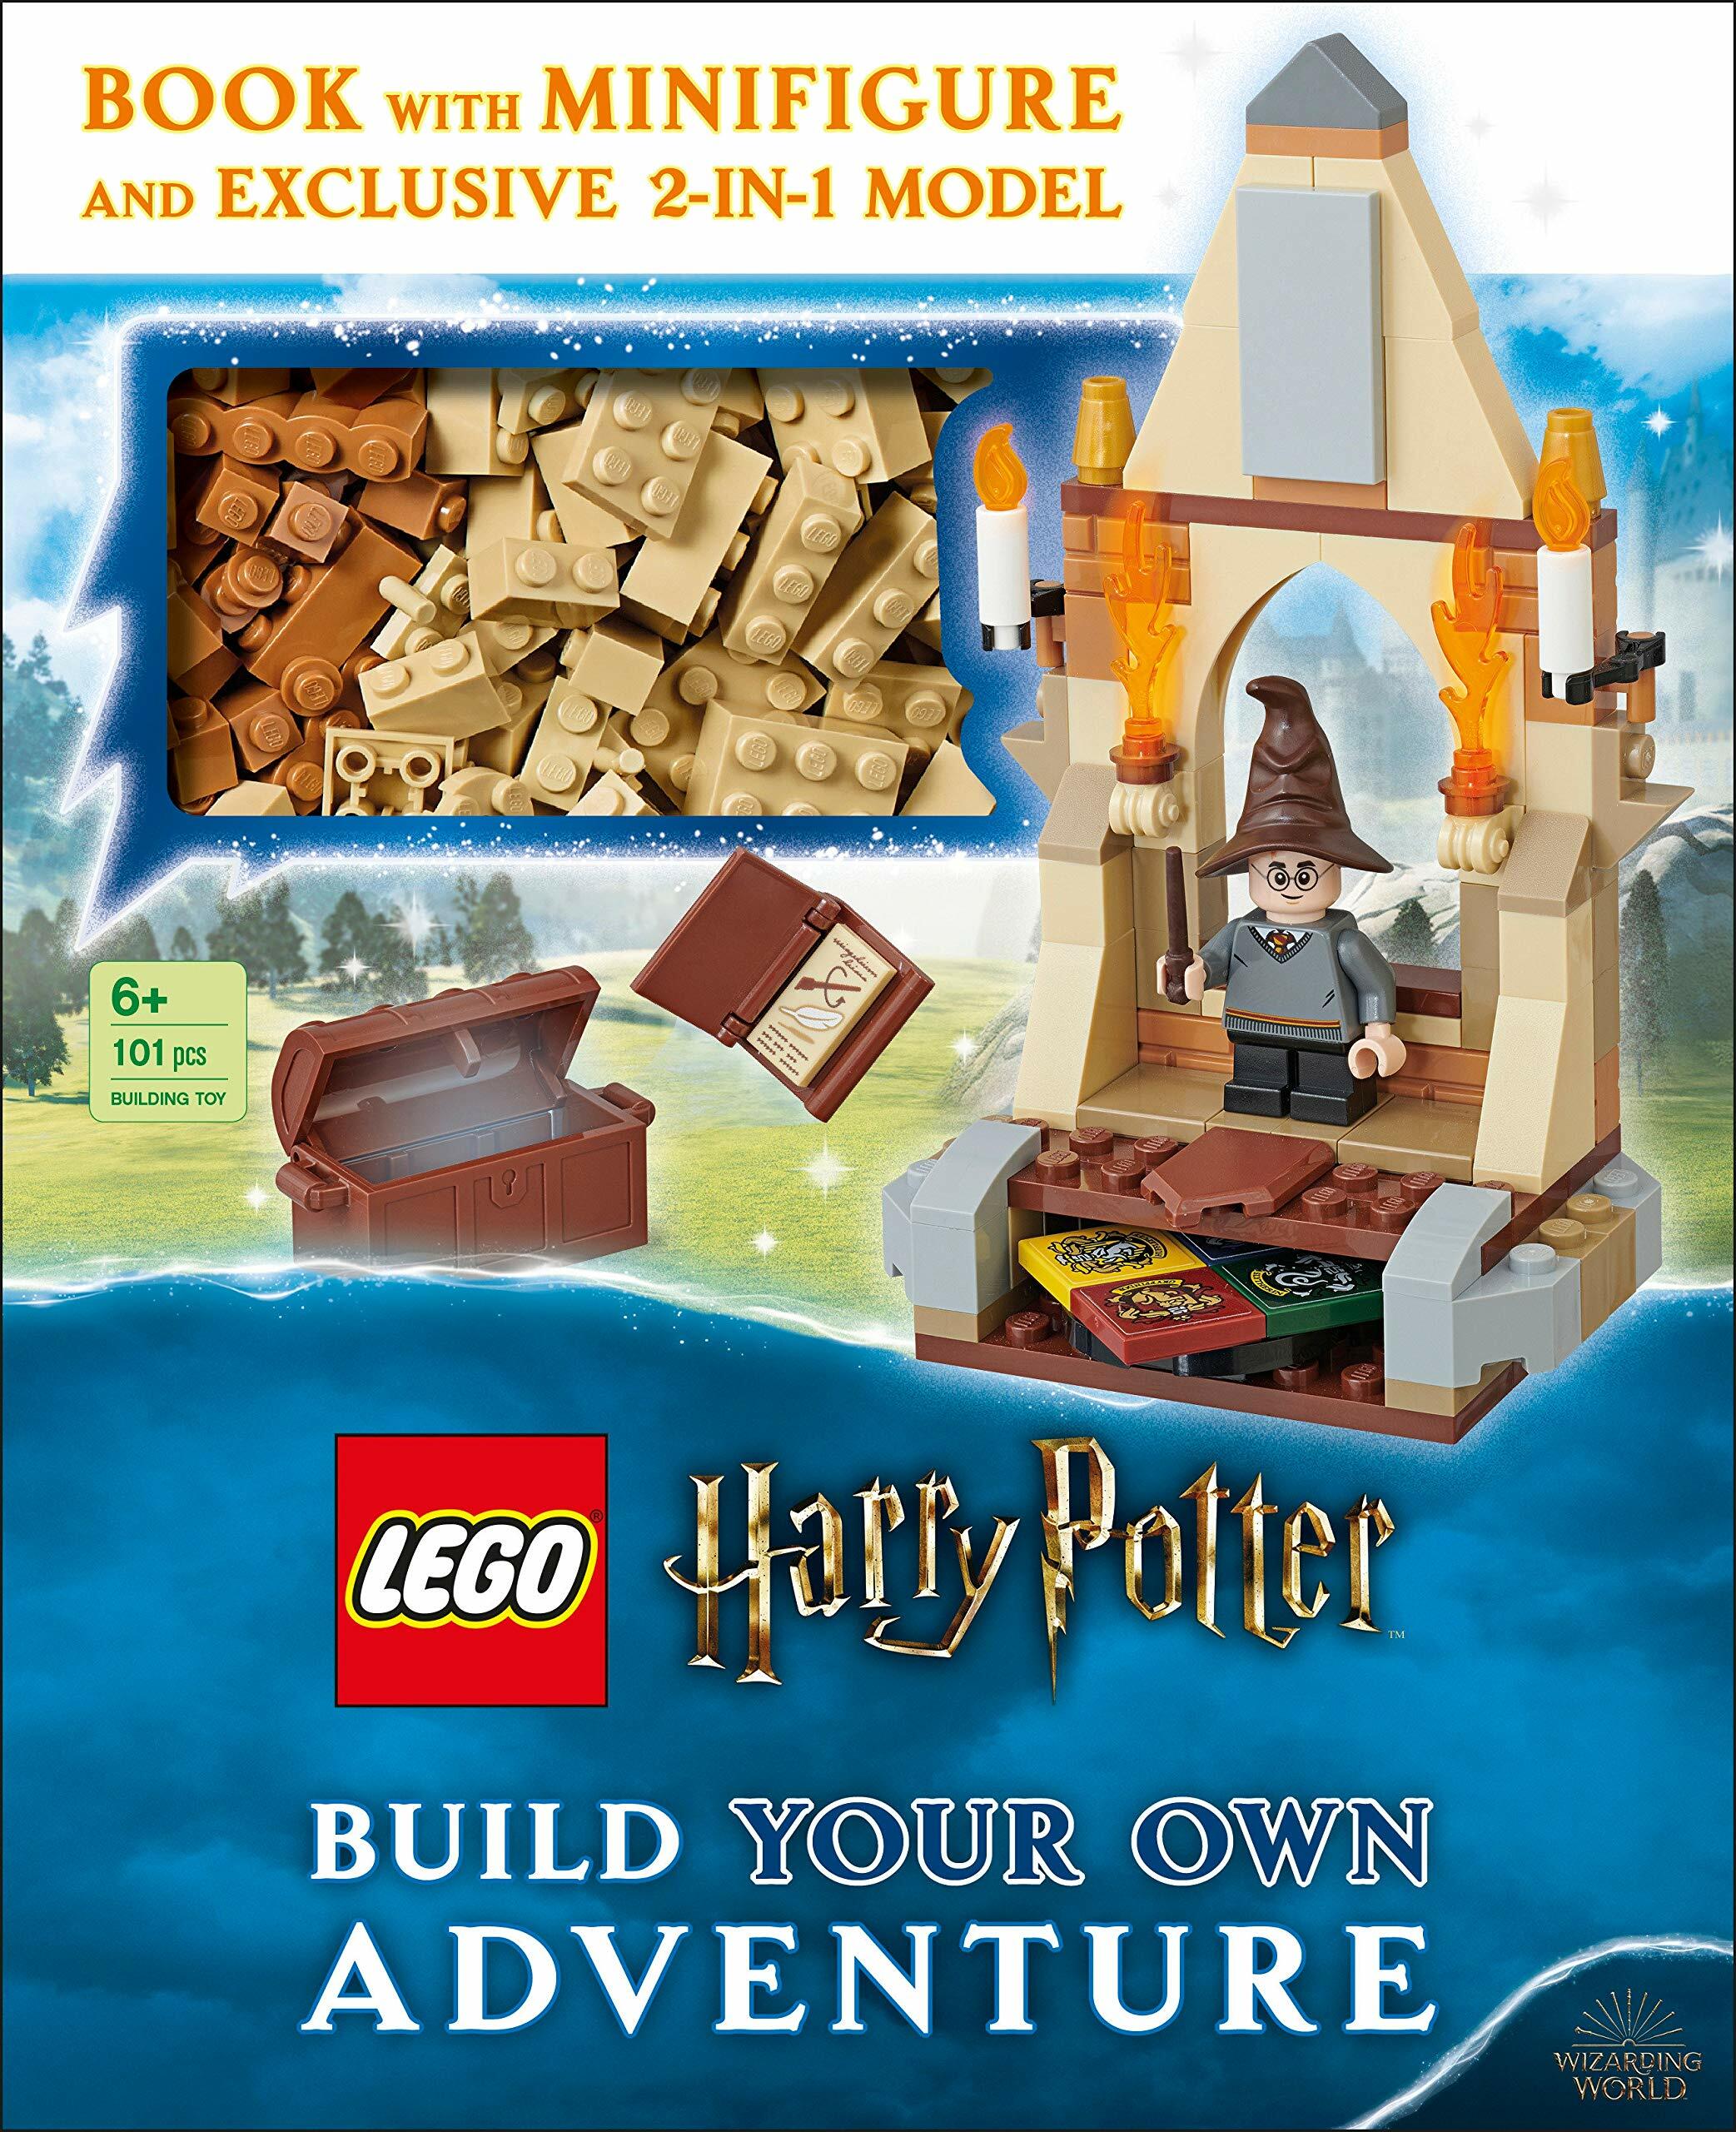 Lego Harry Potter Build Your Own Adventure: With Lego Harry Potter Minifigure and Exclusive Model [With Toy] (Hardcover)